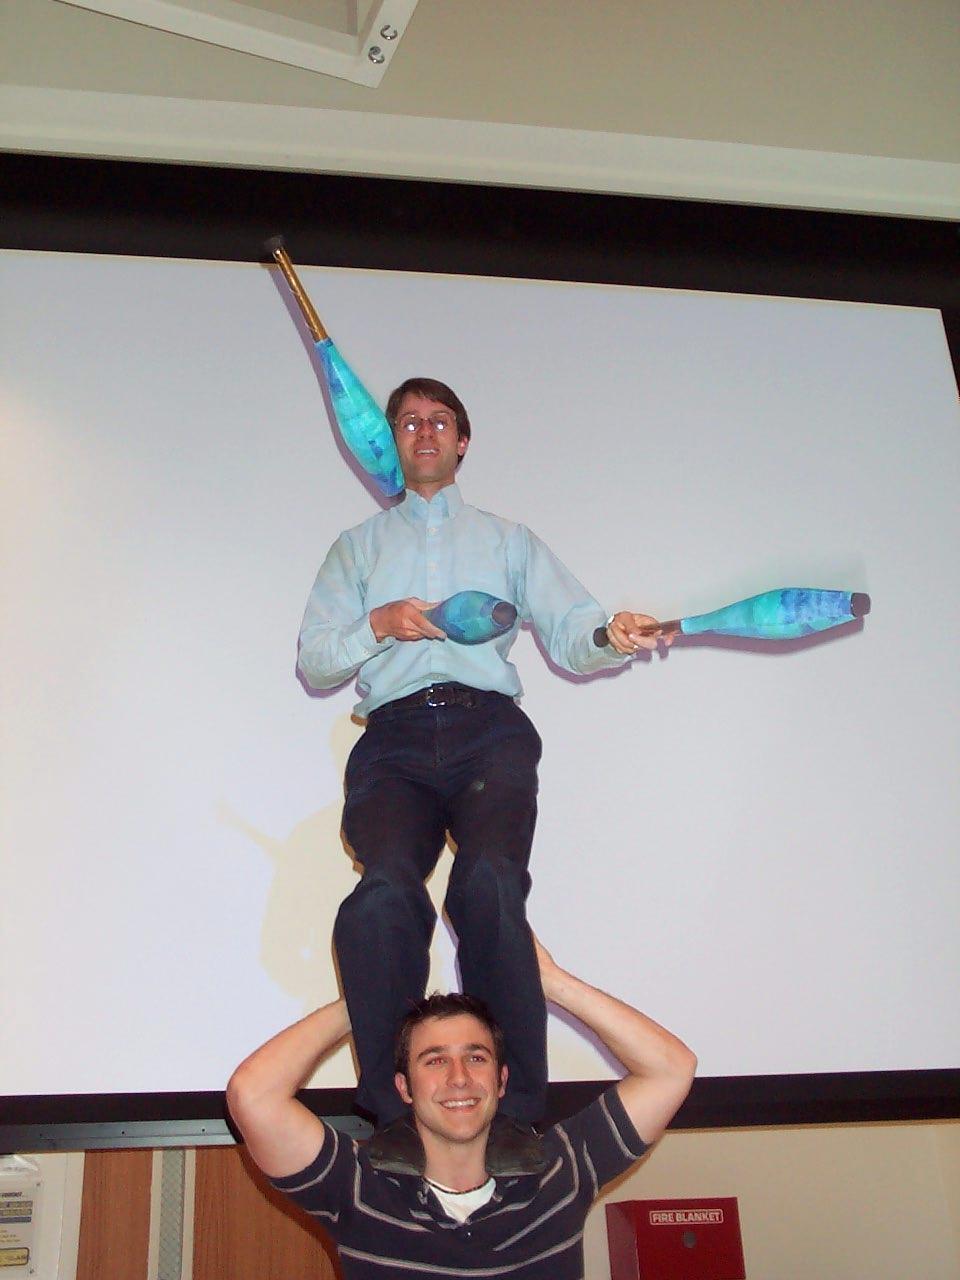 Dr. Deardorff juggling 3 clubs while standing on the shoulders of a student